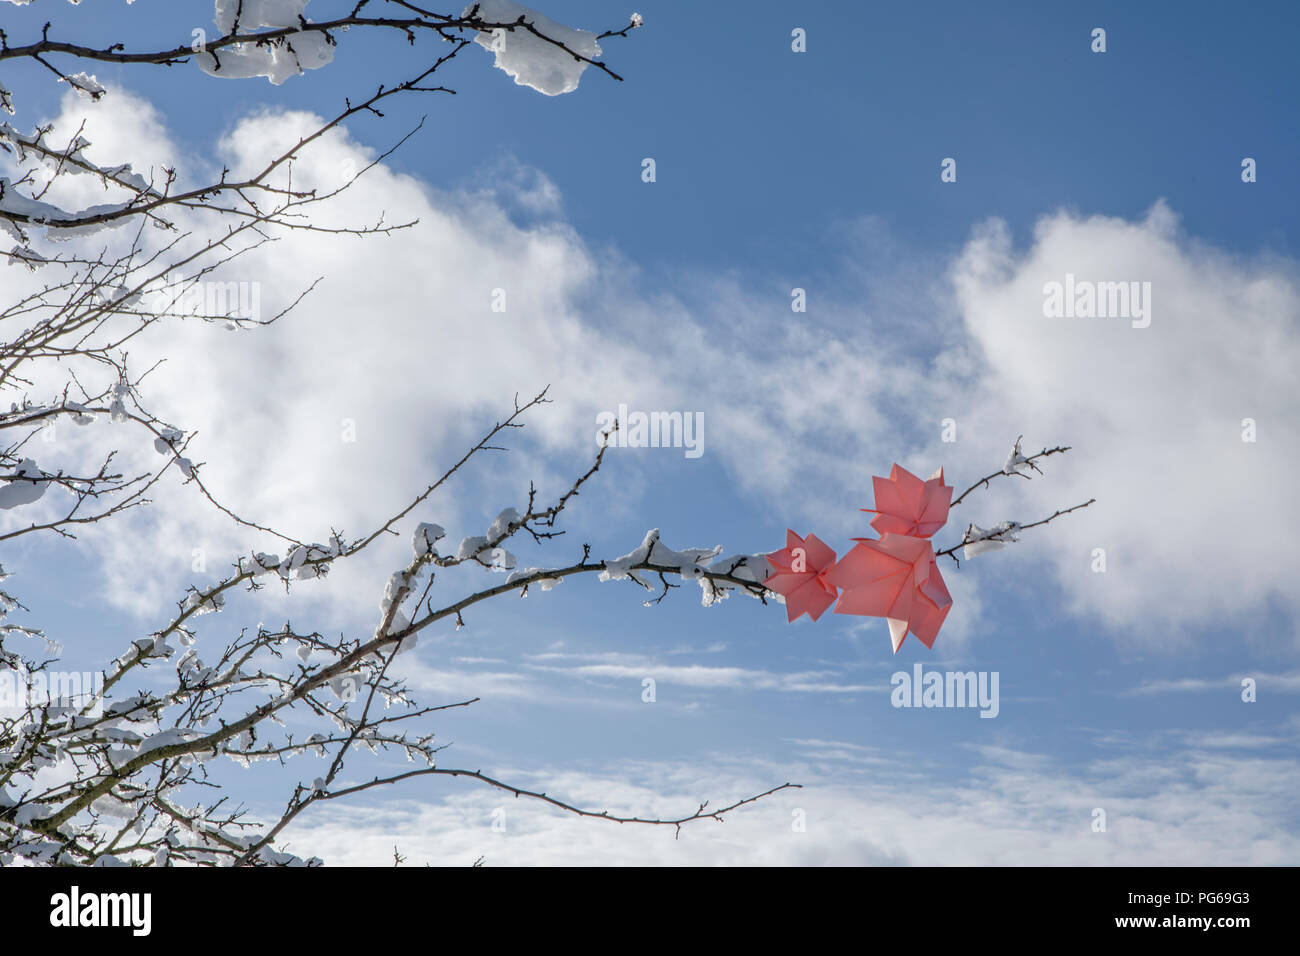 Origami flowers on twigs in winter Stock Photo